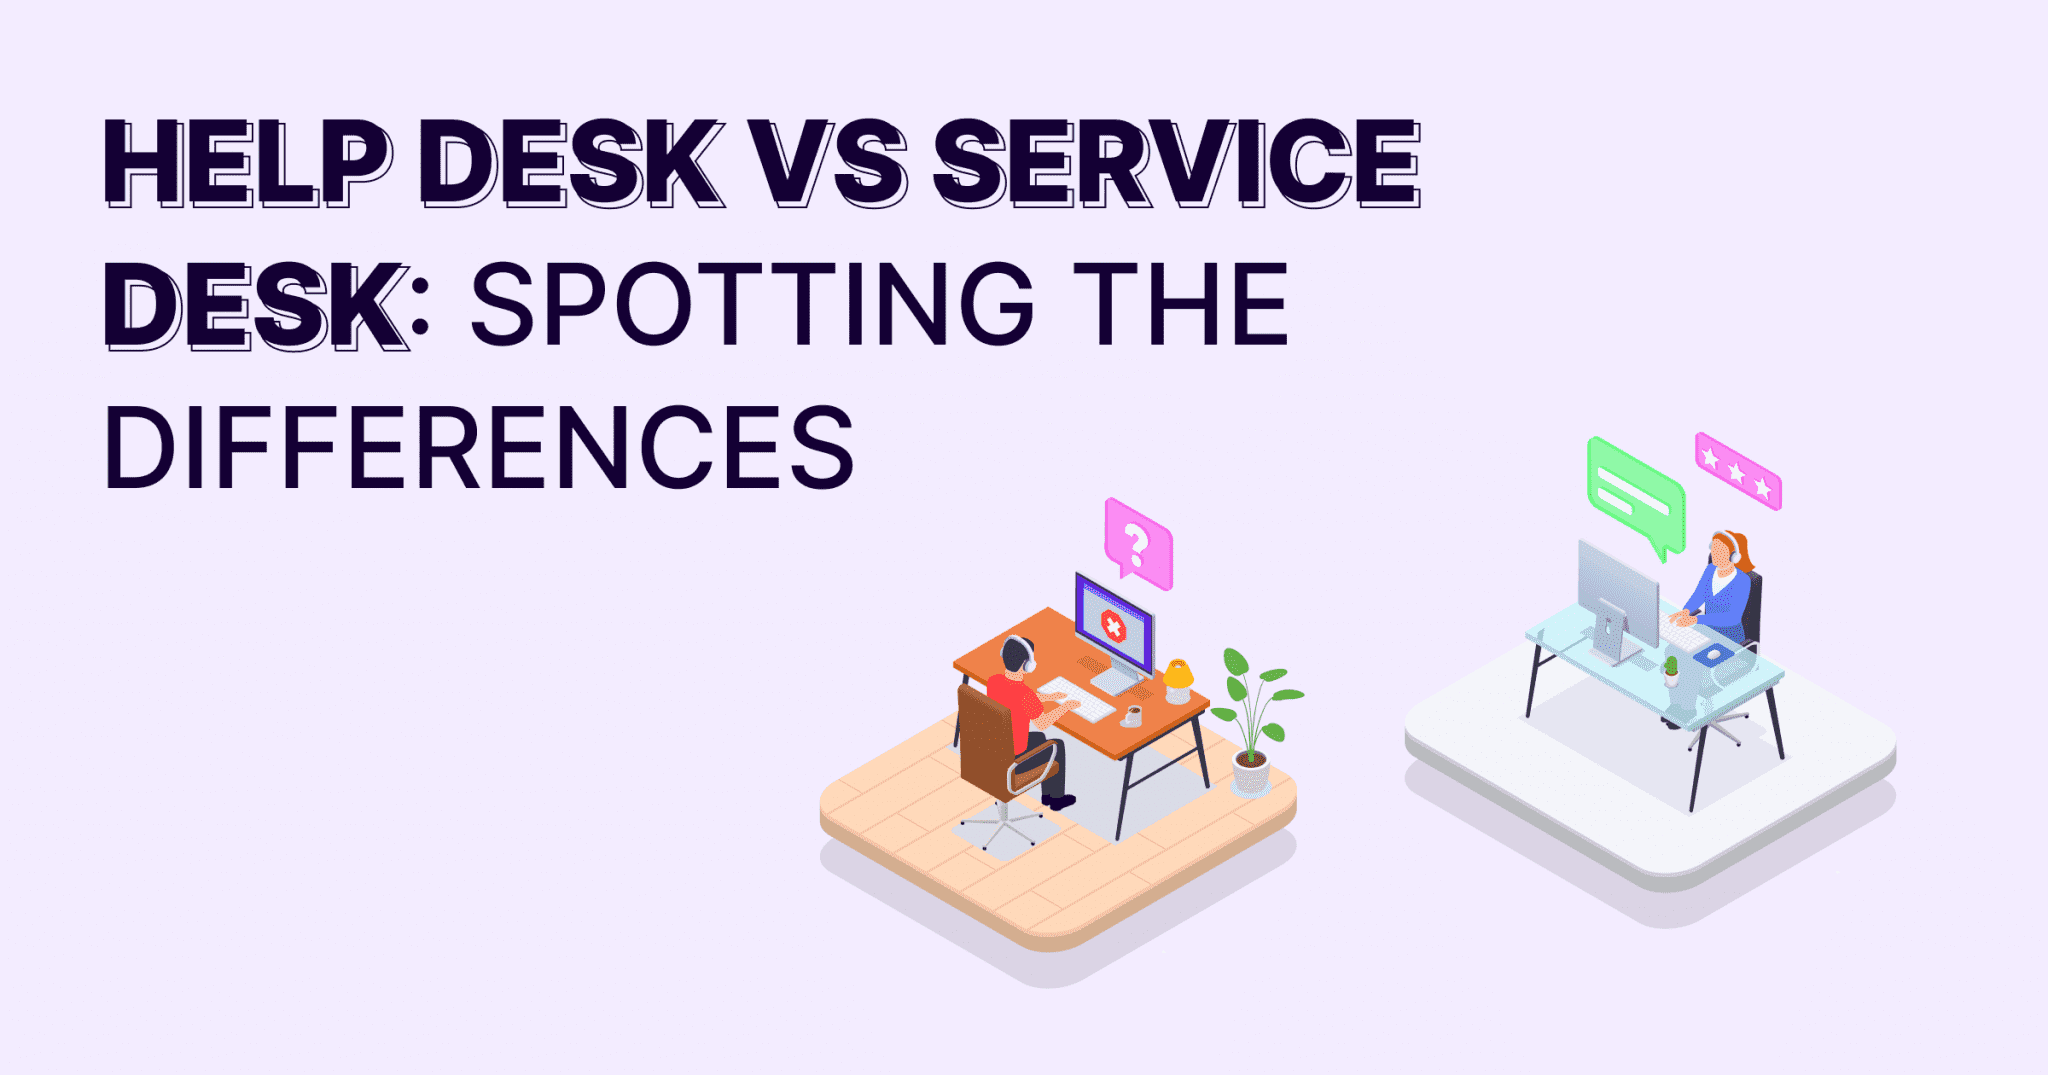 Help Desk and a Service Desk: Spotting the Differences